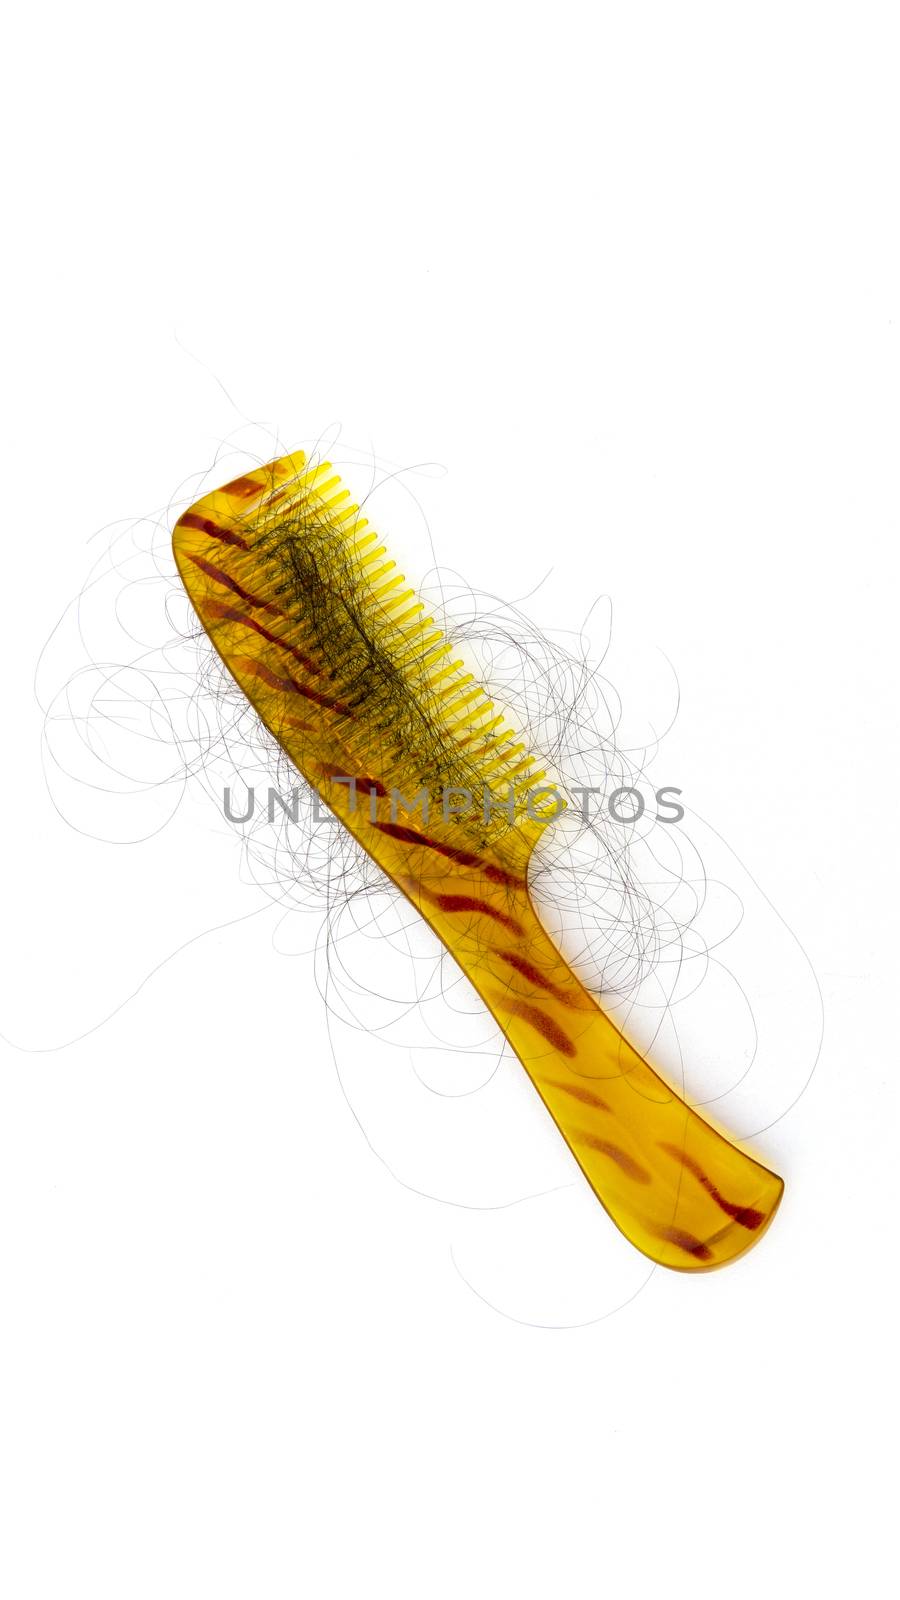 Golden comb with stripes and hair fall as well as dandruff. Phots demostration of hair loss while combing. by sonandonures